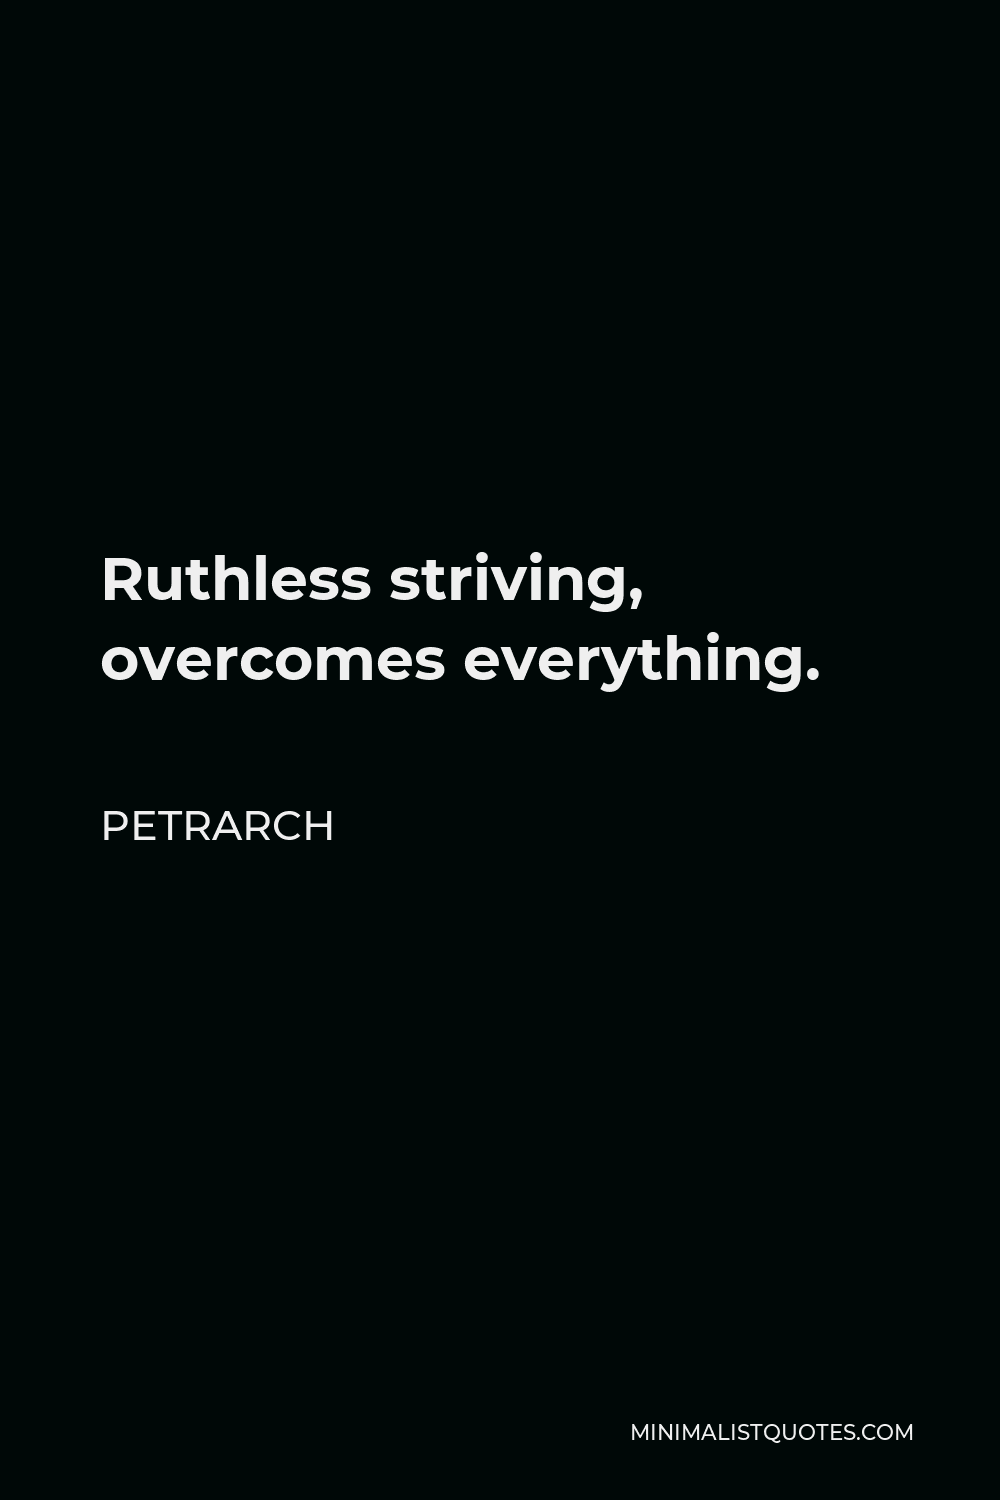 Petrarch Quote - Ruthless striving, overcomes everything.